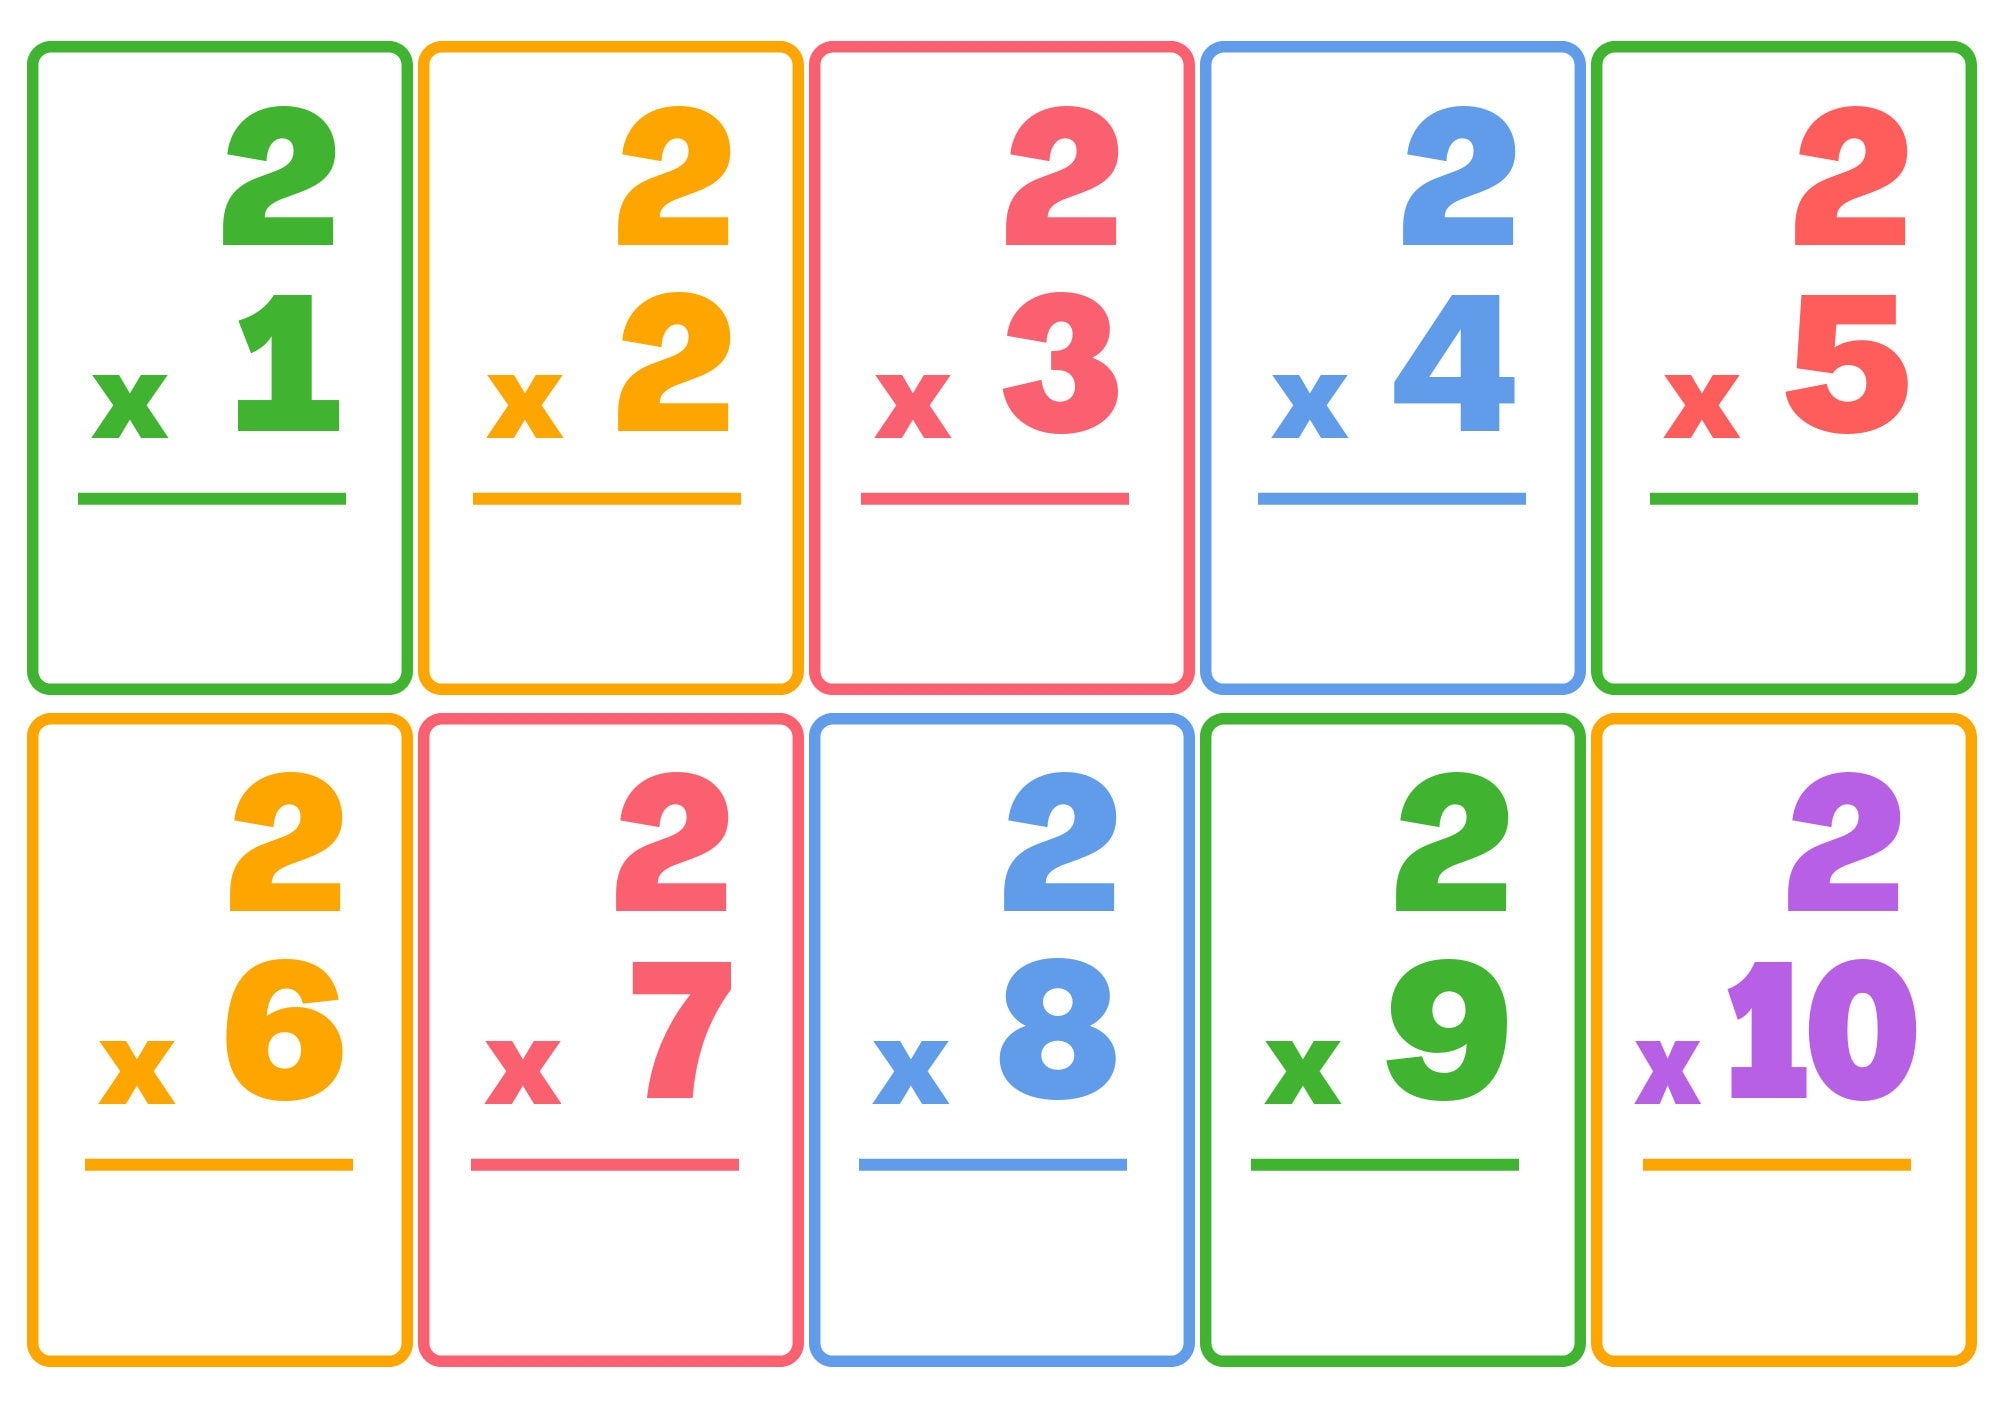 Multiplication Flashcards Printable Flashcards Mathematics Cards A 2 Times Tables Multiplication Poster Math Printable Flashcards Etsy - Flash Cards Multiplication Free Printable